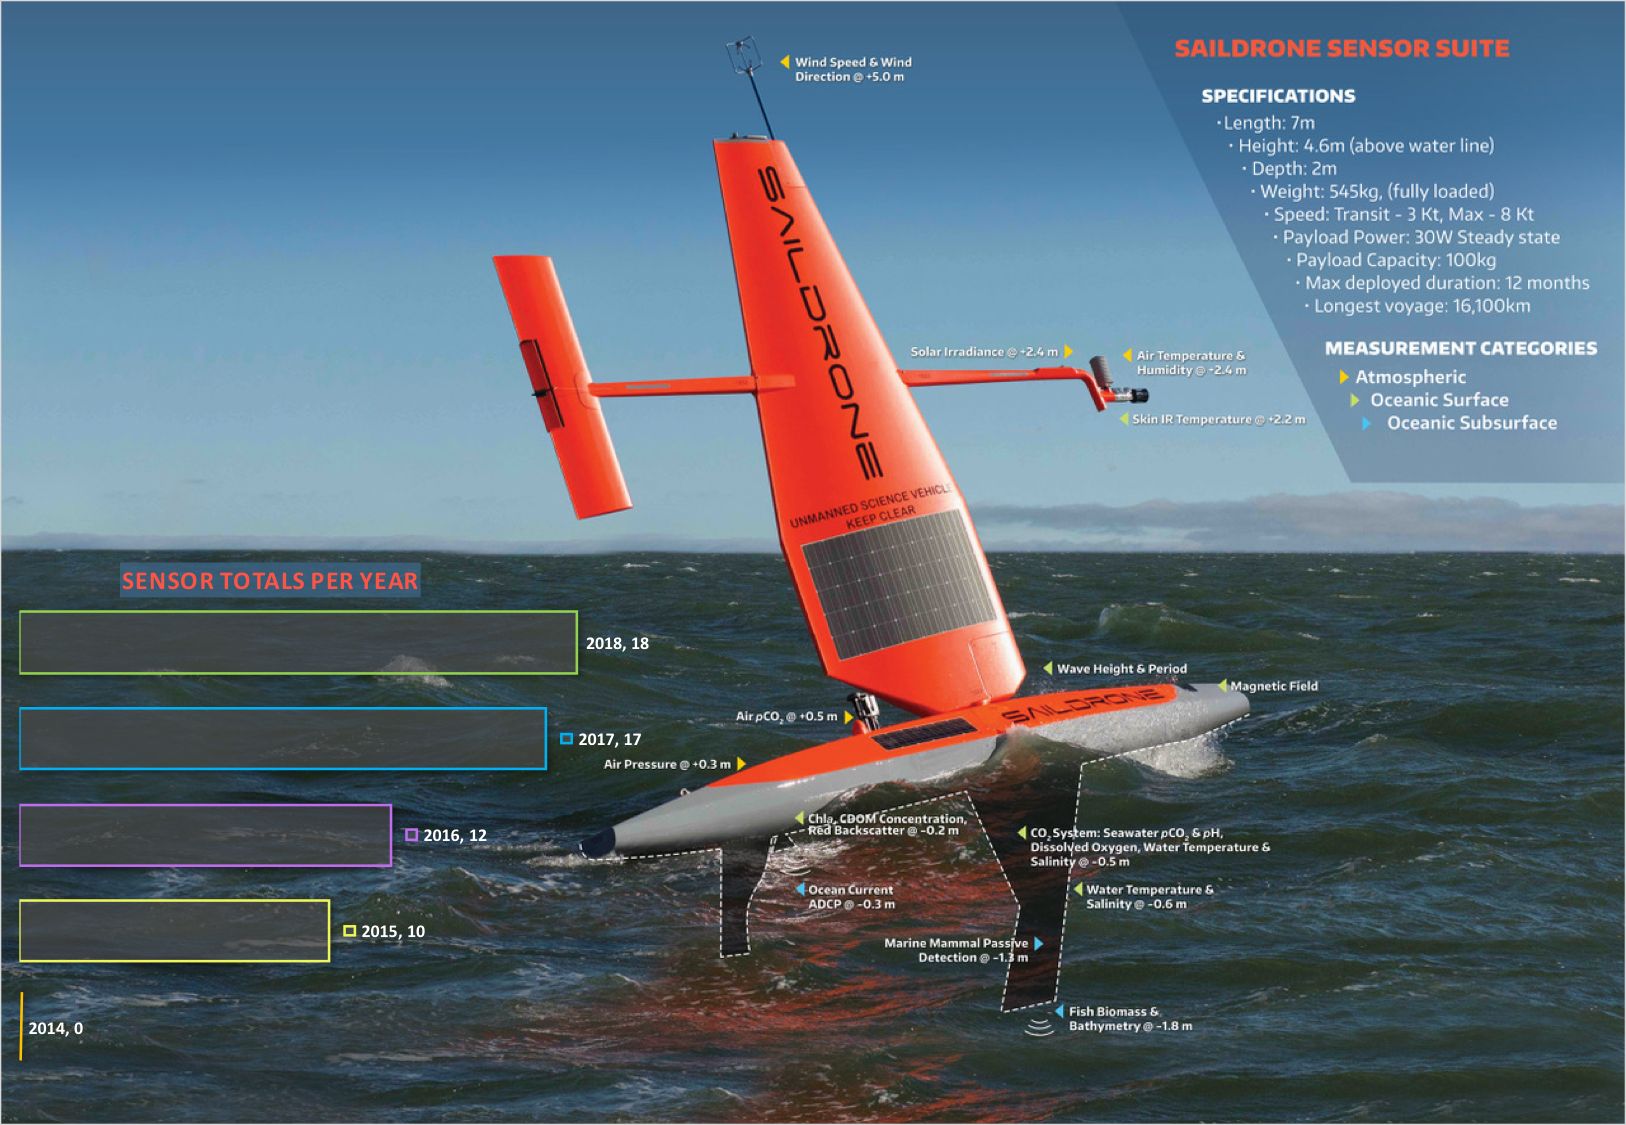 This infographic details the sensor capabilities of a saildrone. Since Saildrone Inc. and NOAA teamed up in 2014, new sensors have been added each year to collect a growing array of oceanographic, fisheries and meteorological data with a total of 18 sensors as of 2018. Download the image to view a larger version of the text. 